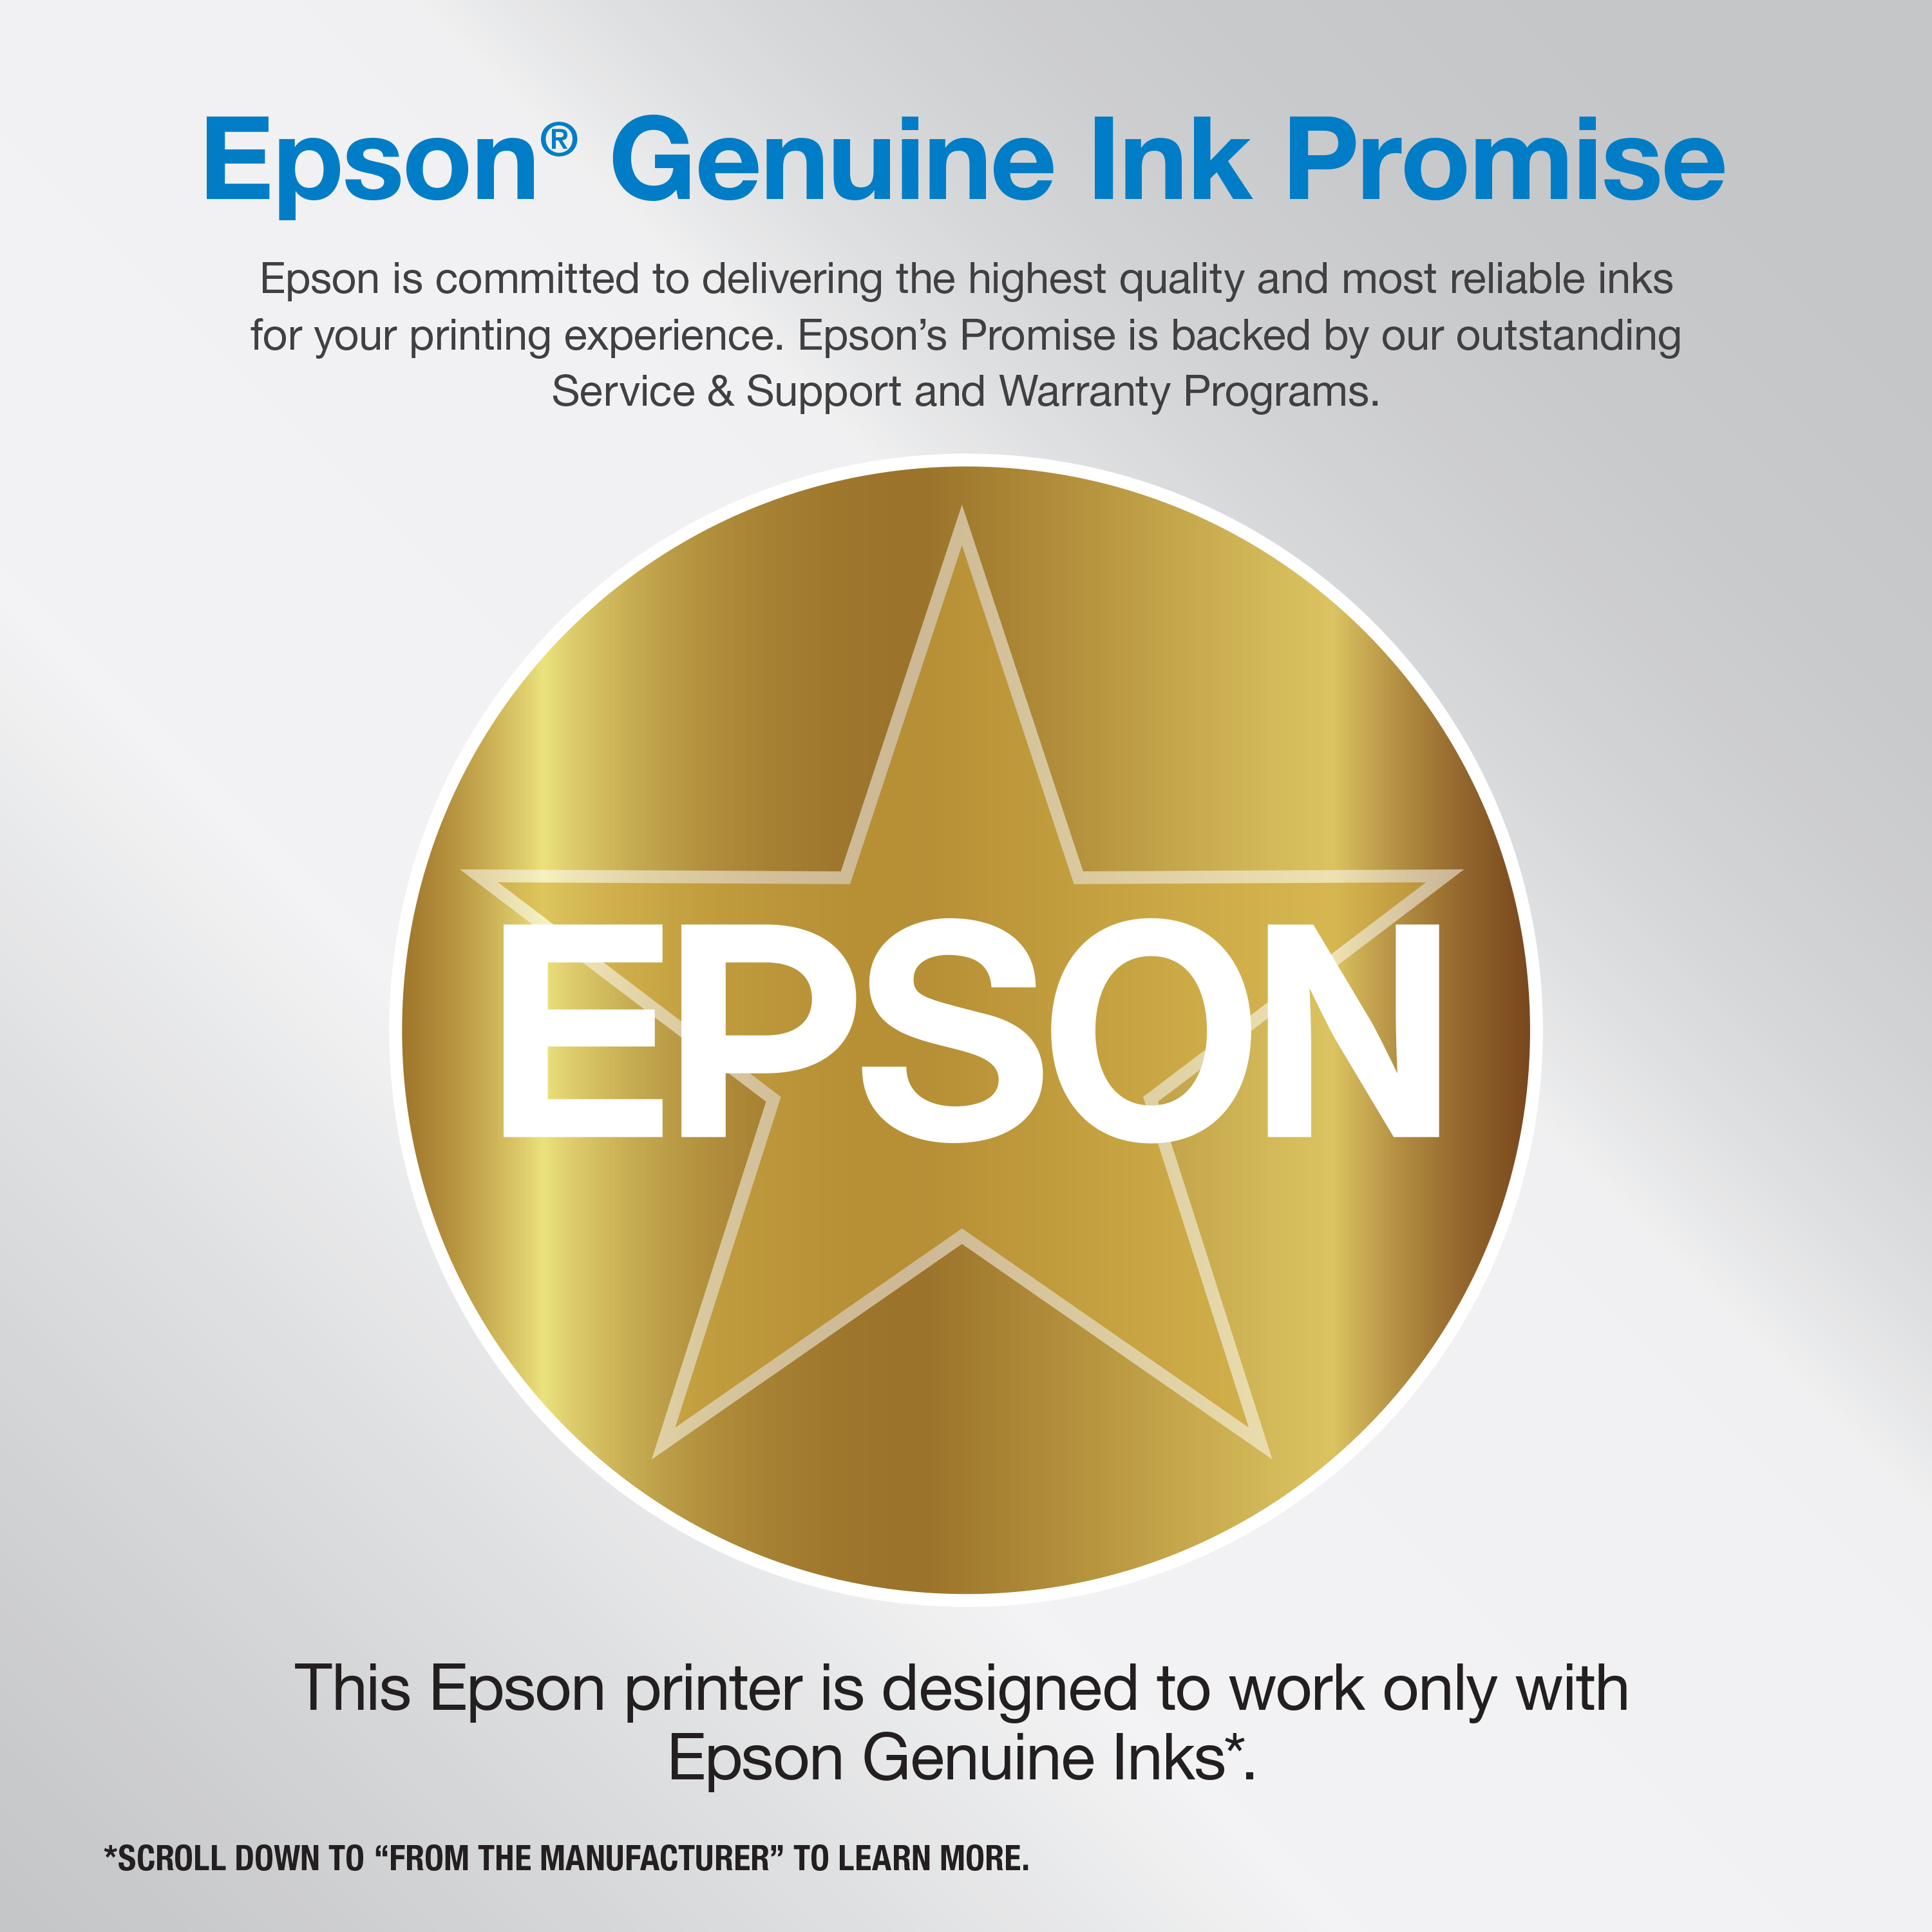 Epson(r) Workforce(r) Pro WF-3820 Wireless Color Inkjet All-in-One Printer, Black Large - image 2 of 6